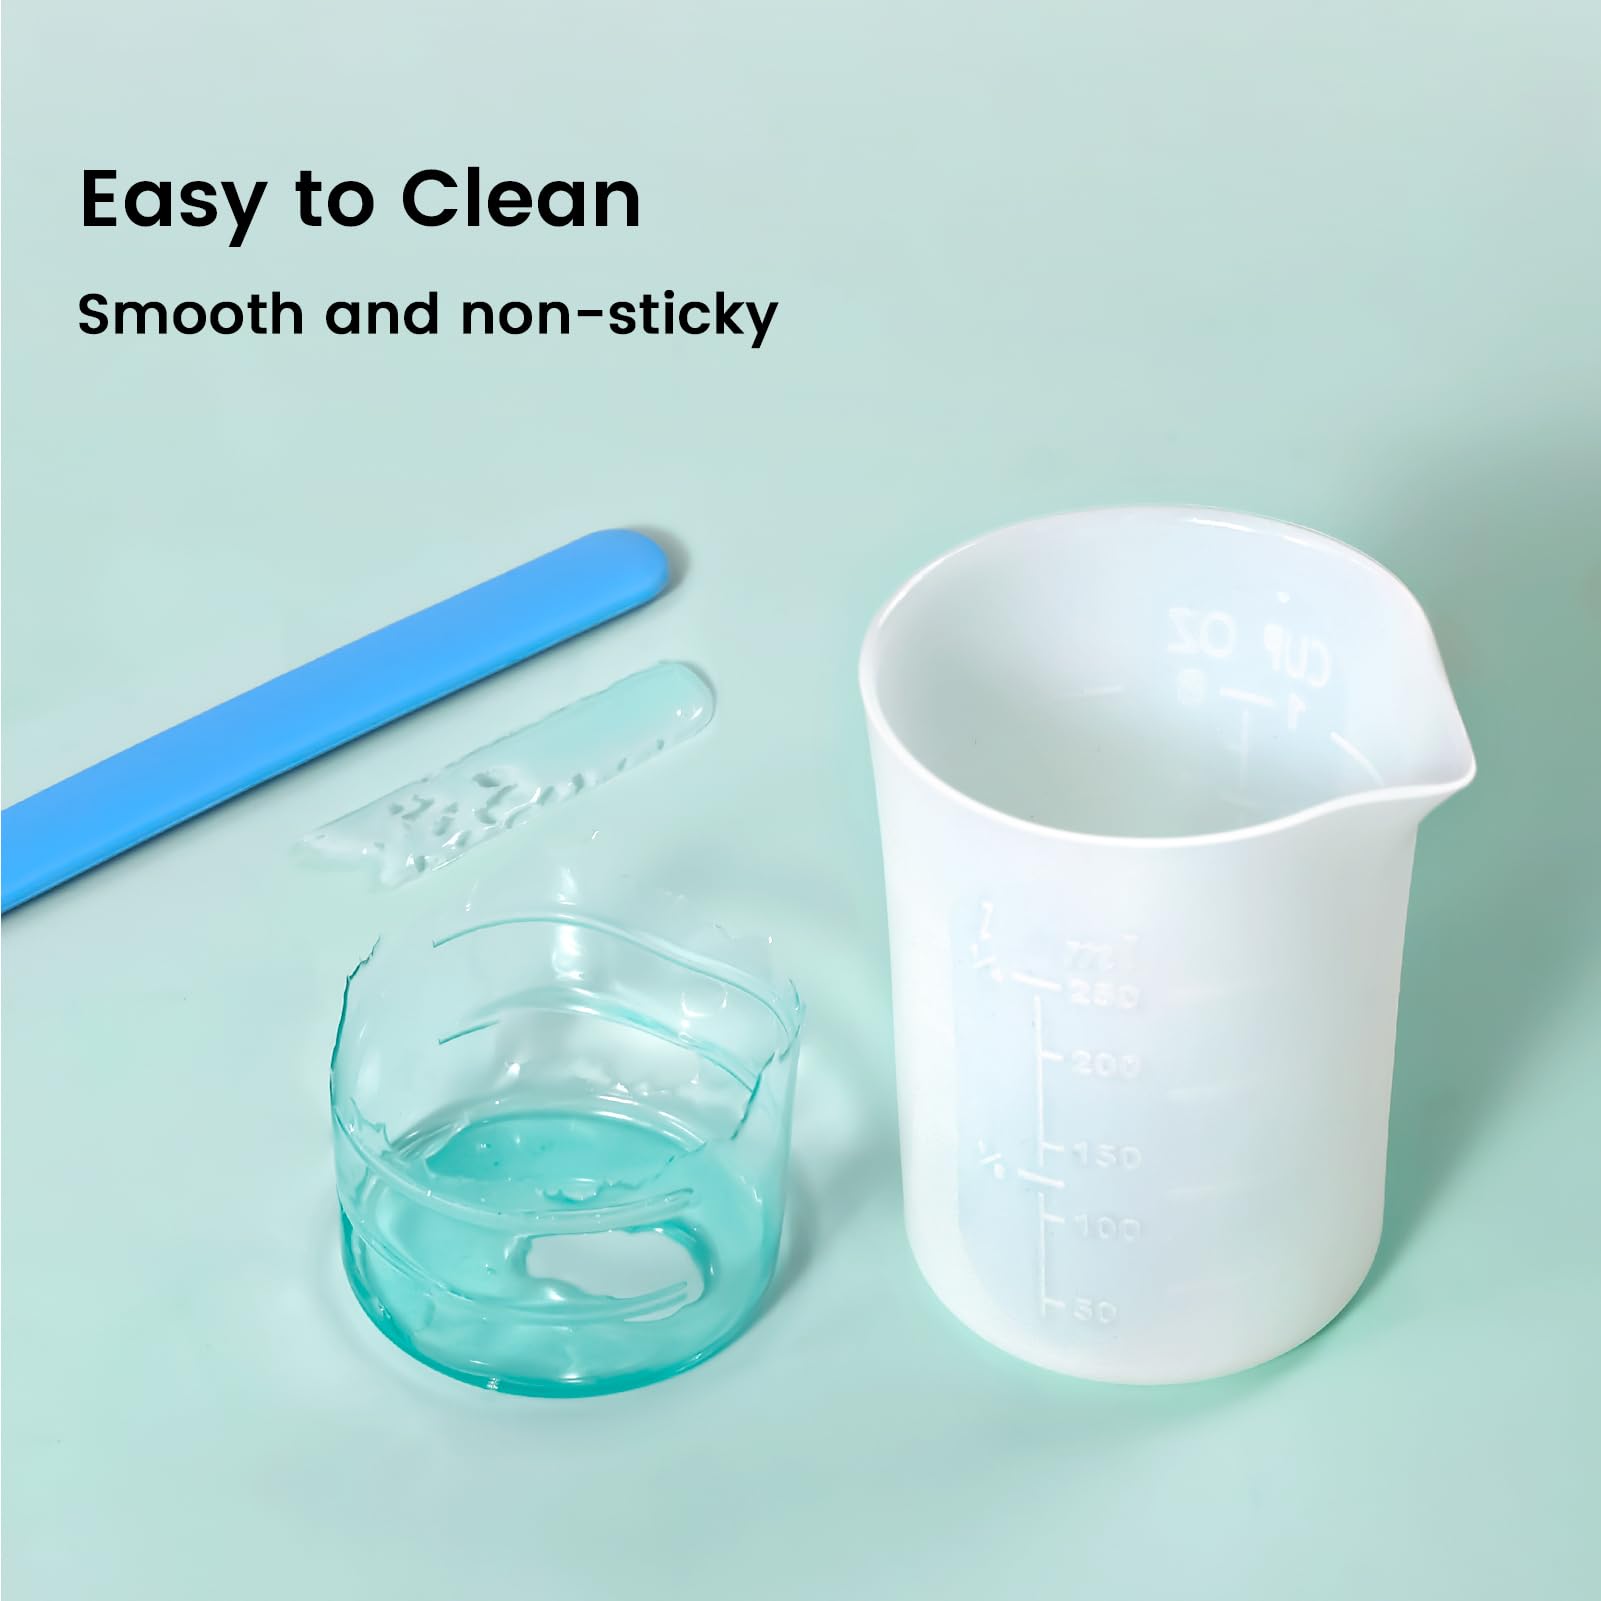 Nicpro 100 & 250ml Silicone Resin Measuring Cups Tool Kit, Measure